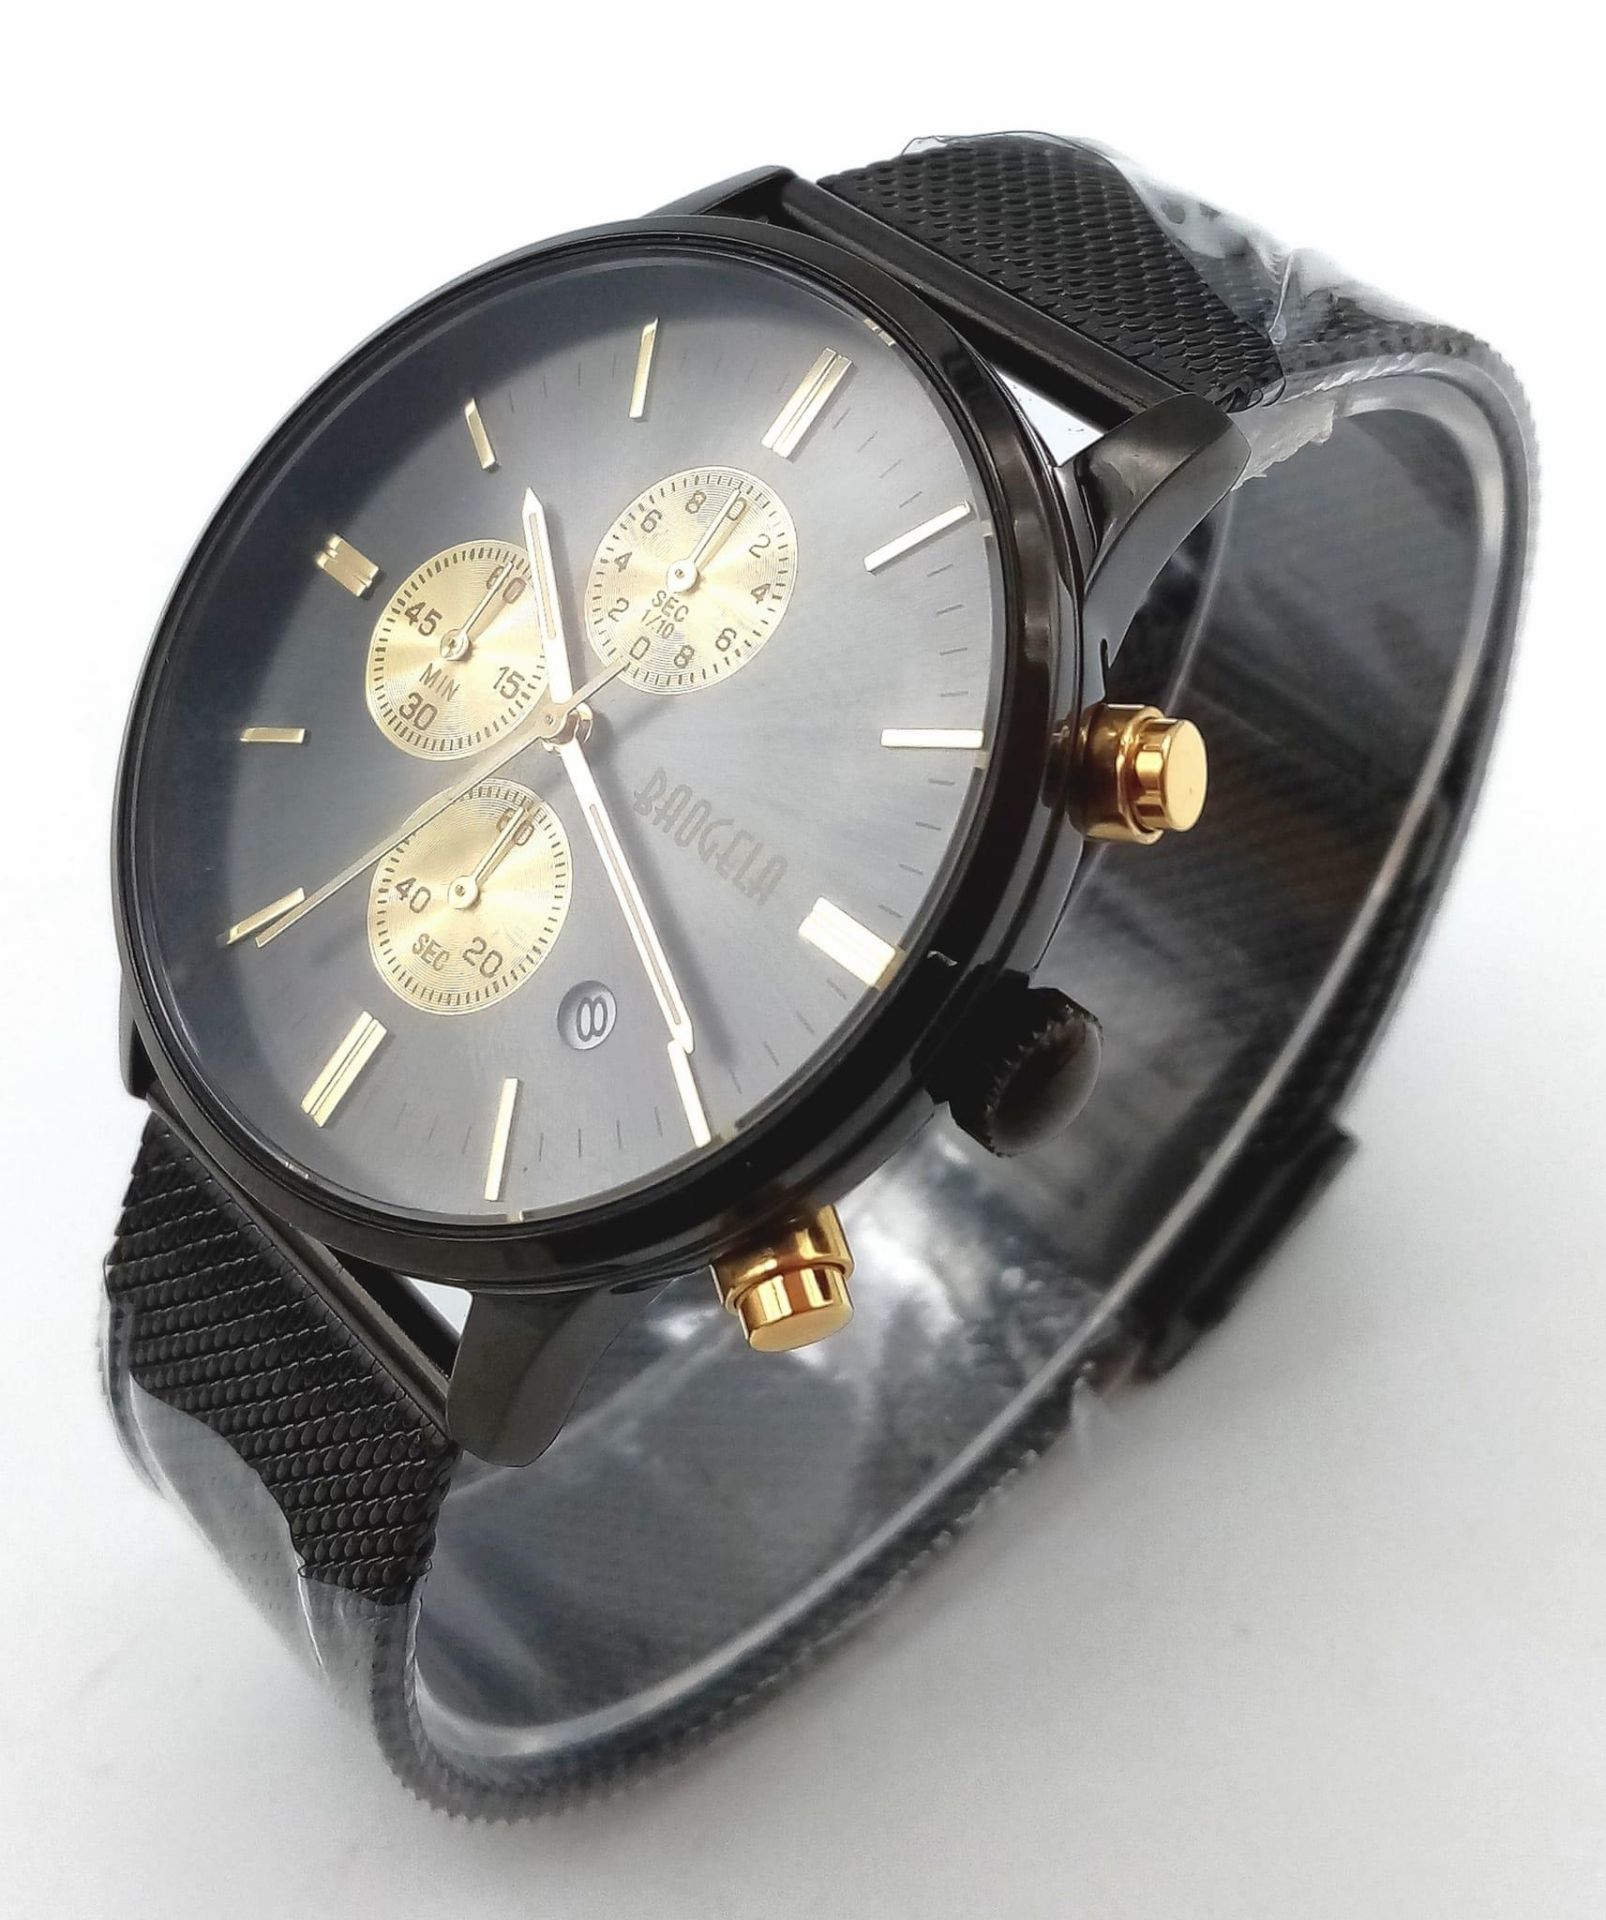 Unworn, Men’s Chronograph Sports Date Watch by Baogela. 45mm including Crown. Comes with Box and - Image 2 of 17